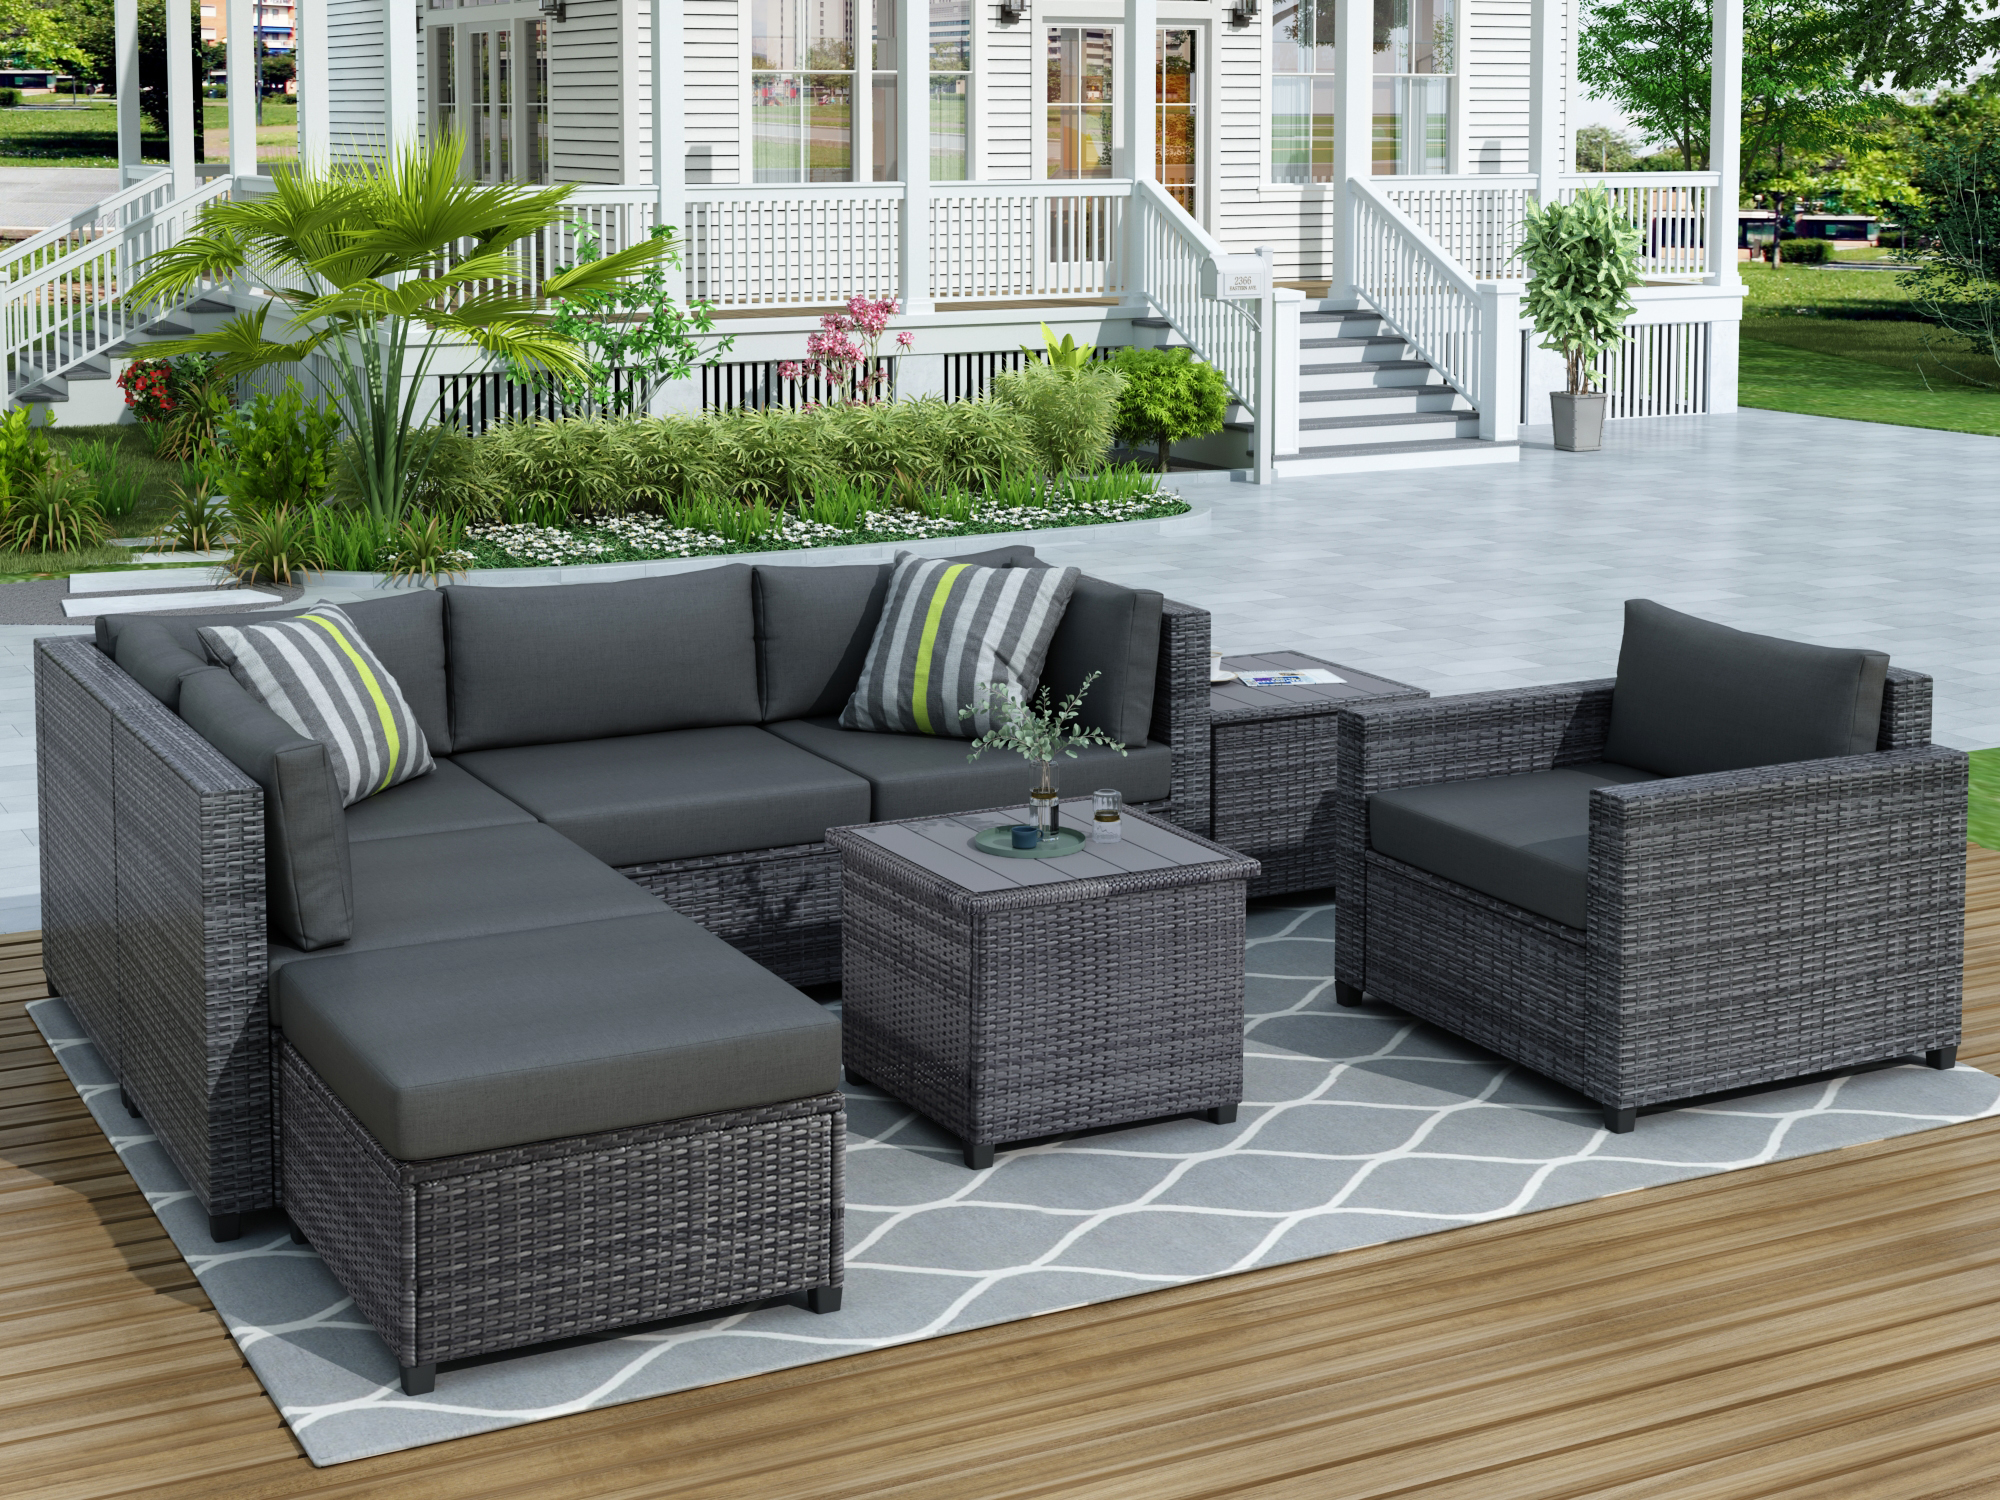 8 Piece Rattan Sectional Seating Group with Cushions - WY000271AAE